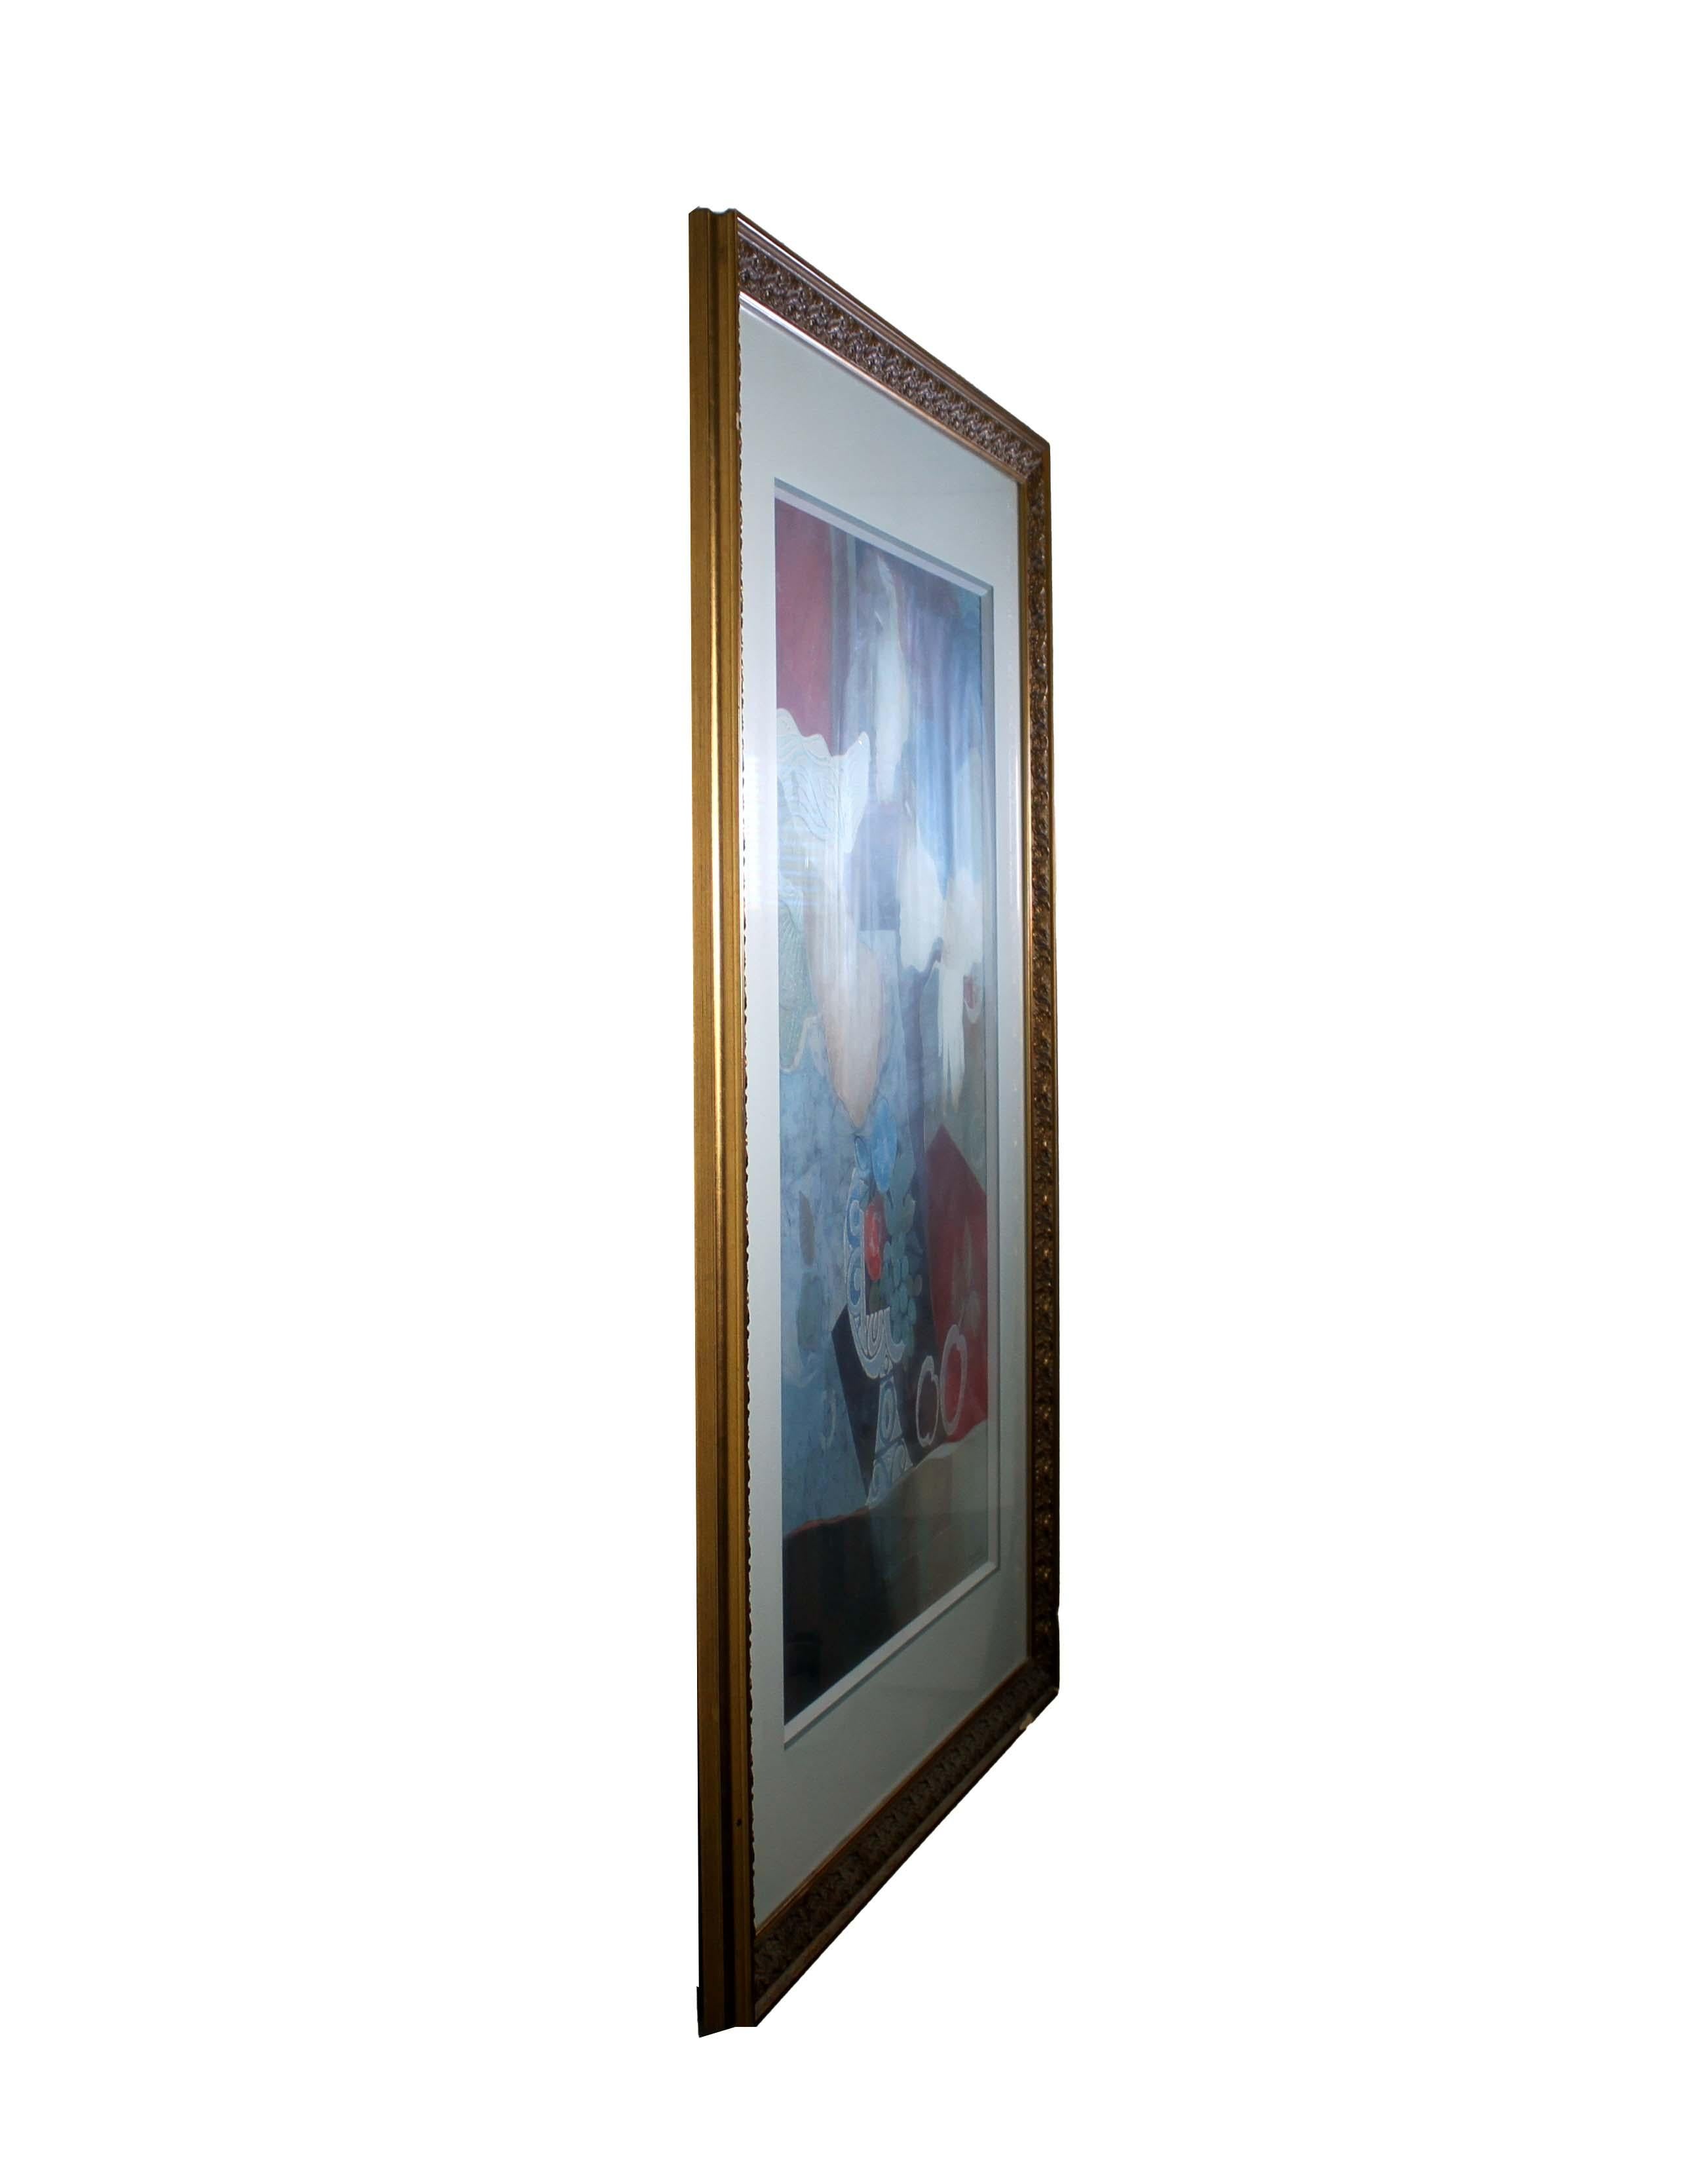 Sunol Alvar Acolliment Signed Contemporary Modern Lithograph 140/175 Framed 1992 In Good Condition For Sale In Keego Harbor, MI